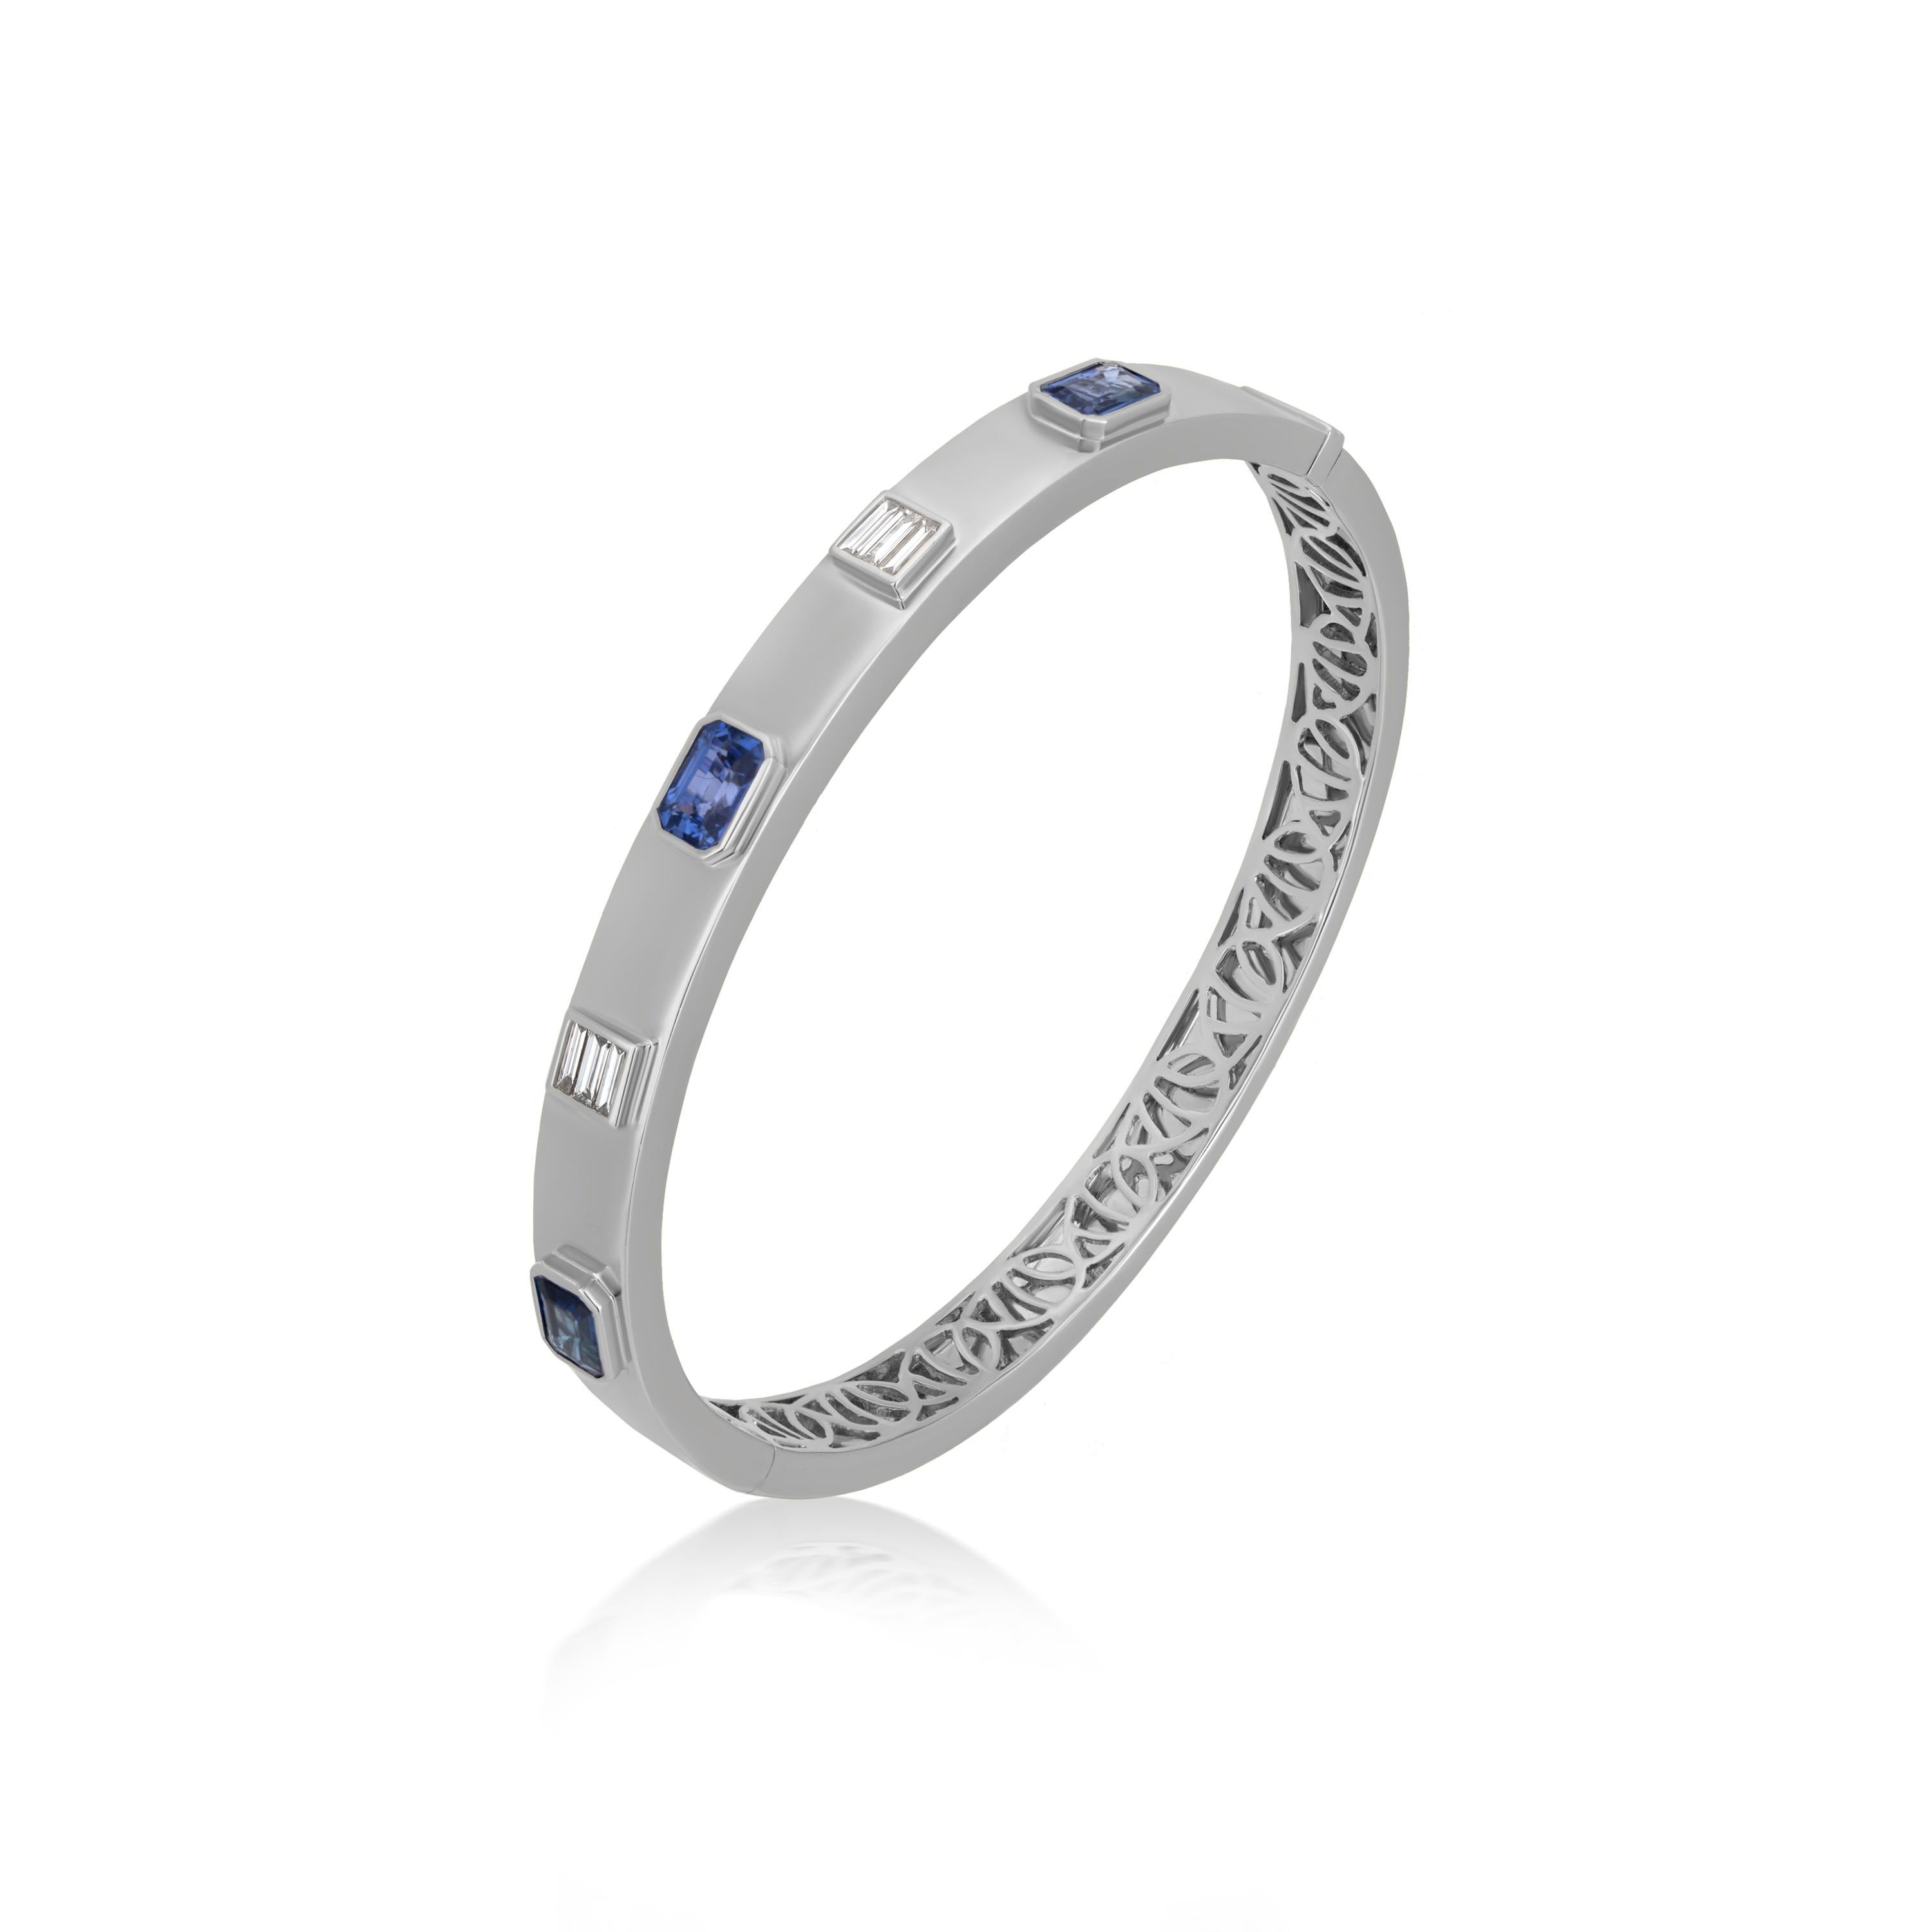 This blue sapphire bangle is beautified by Nigaam with baguette full-cut white diamonds and octagon-shaped blue sapphires encrusted on 18K White Gold. The white diamonds are in the bar setting and the blue sapphire in a bezel setting, lending the